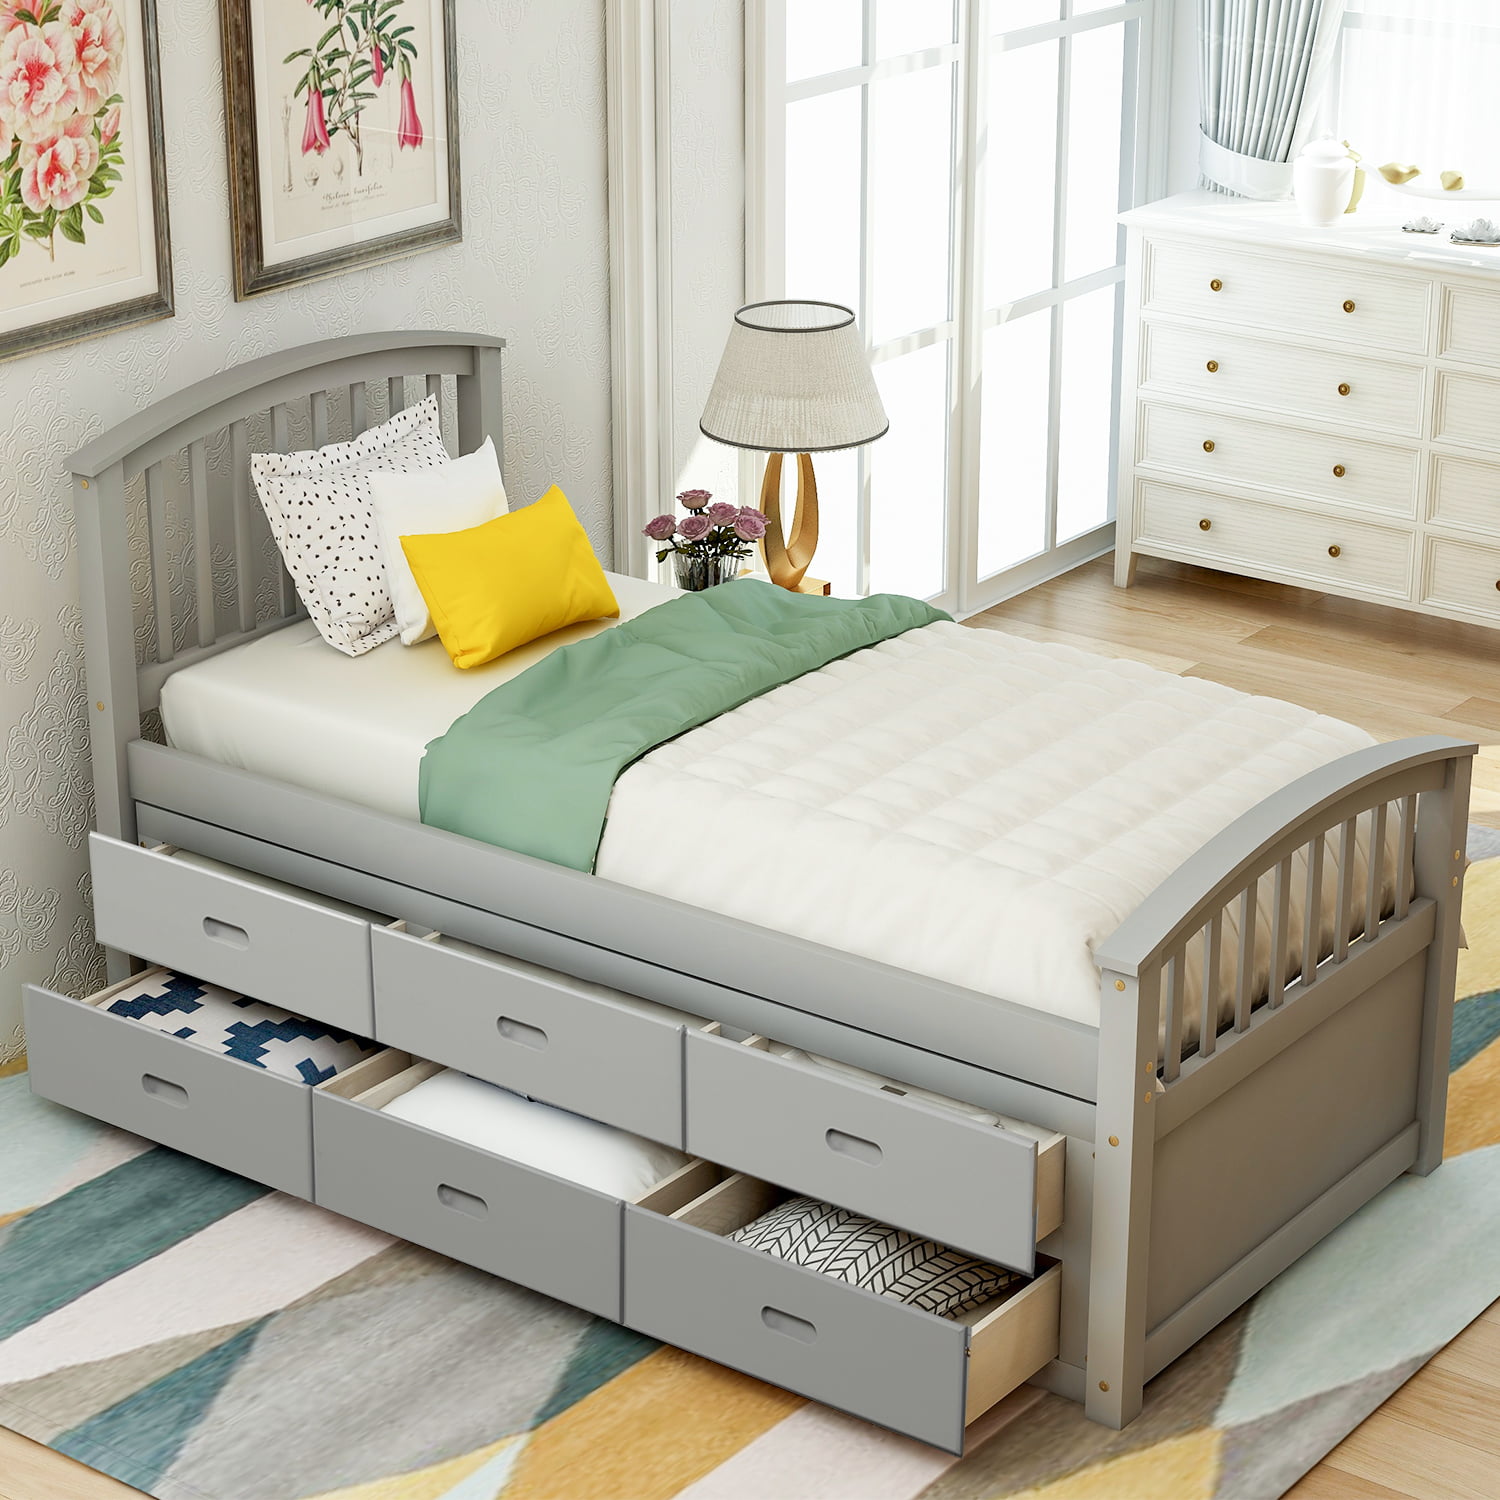 XGEEK ORIS FUR. Twin Size Platform Storage Bed Solid Wood Bed with 8 Drawers(Gray)